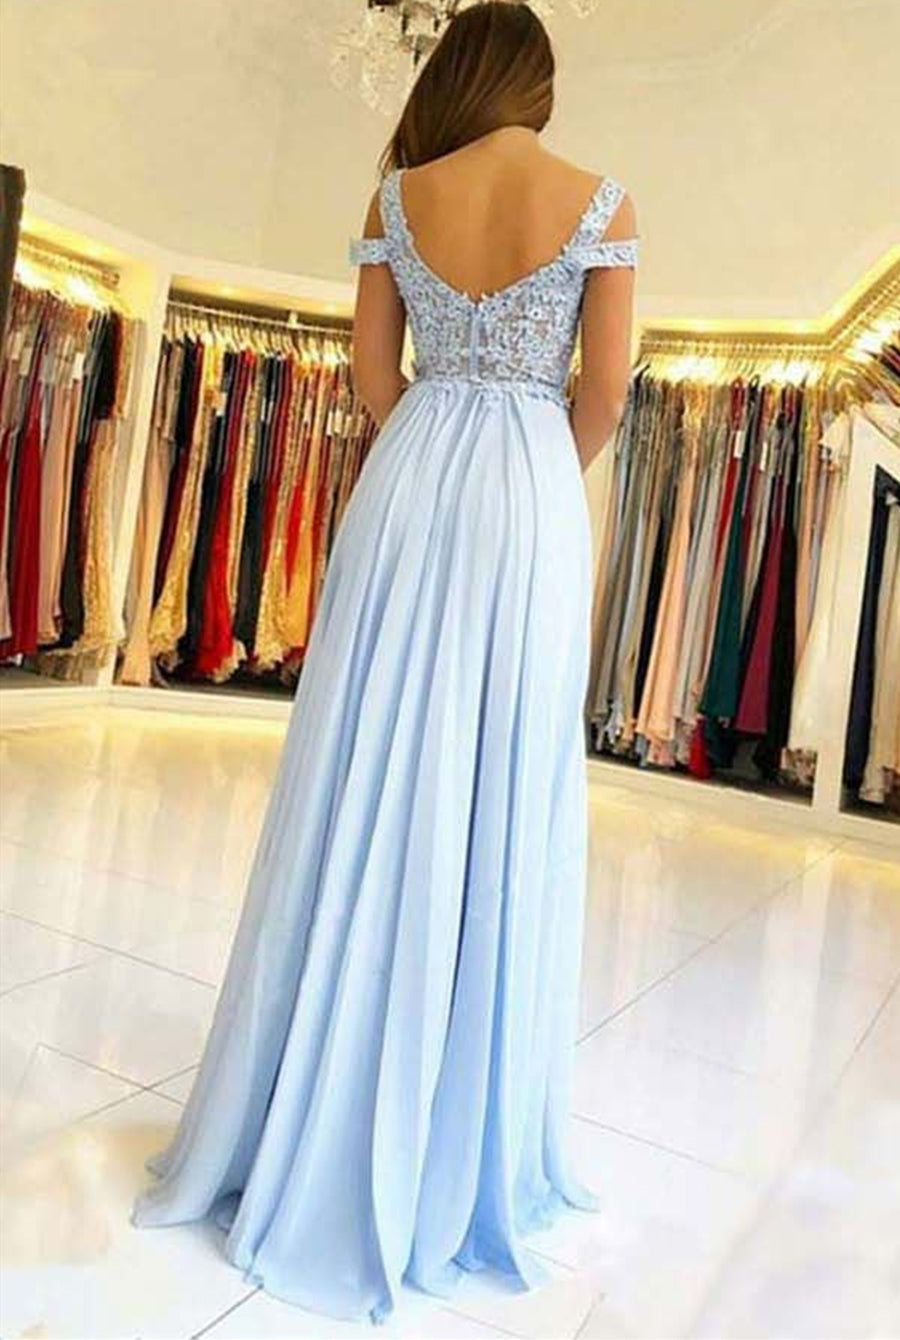 Load image into Gallery viewer, Light Blue Off Shoulder Lace Tulle Long Prom Dresses with Leg Slit, Light Blue Lace Graduation Formal Evening Dresses
